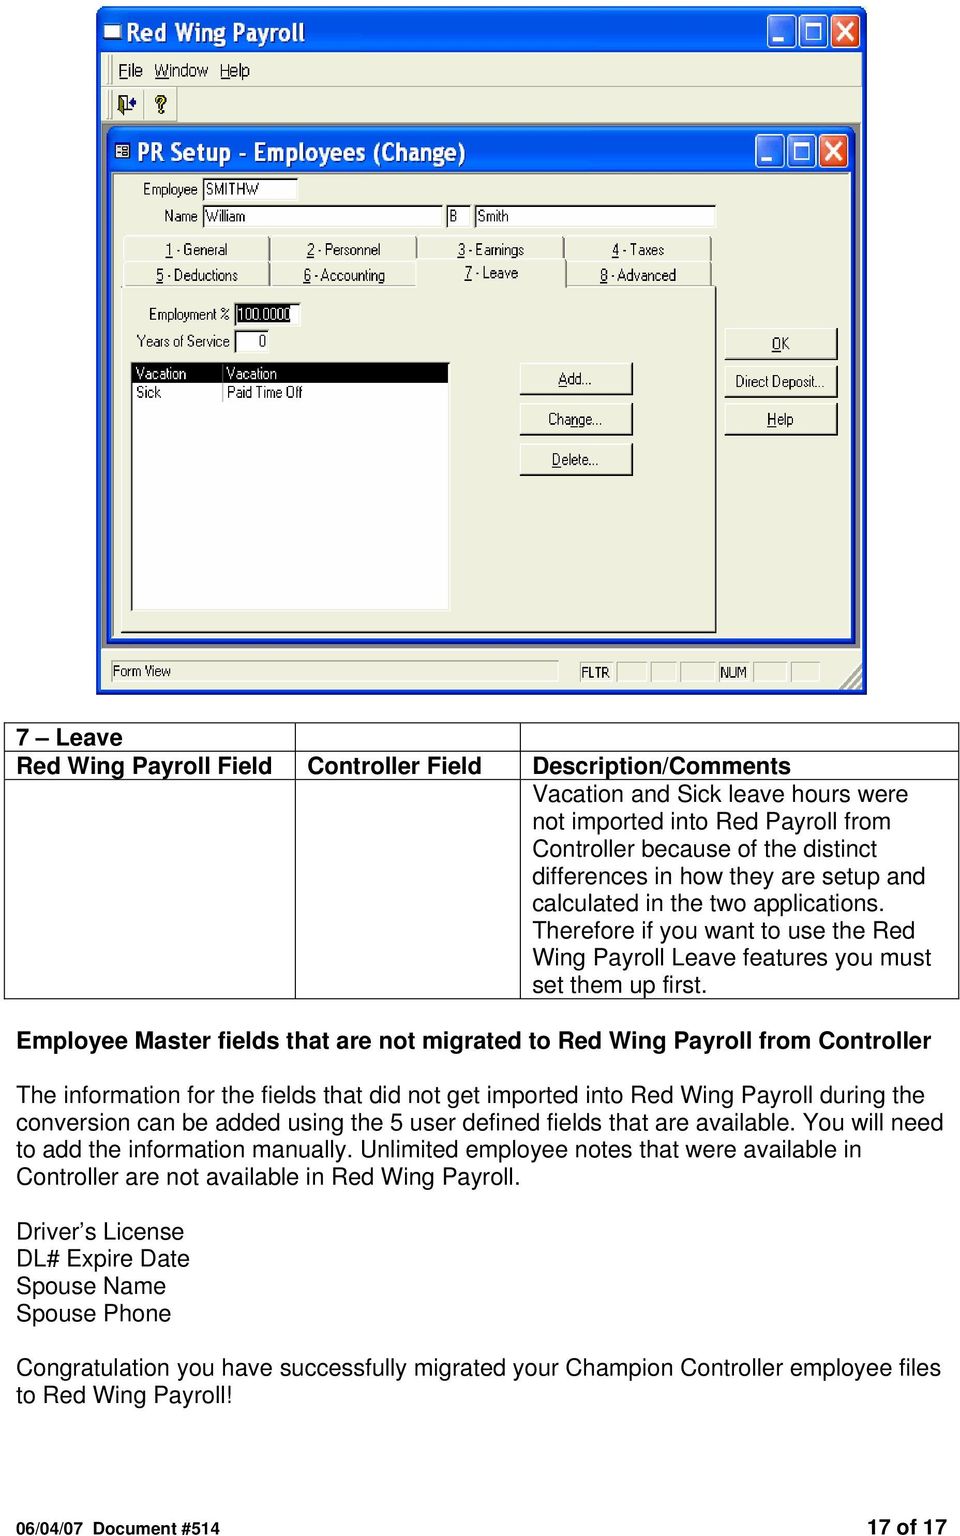 Employee Master fields that are not migrated to Red Wing Payroll from Controller The information for the fields that did not get imported into Red Wing Payroll during the conversion can be added